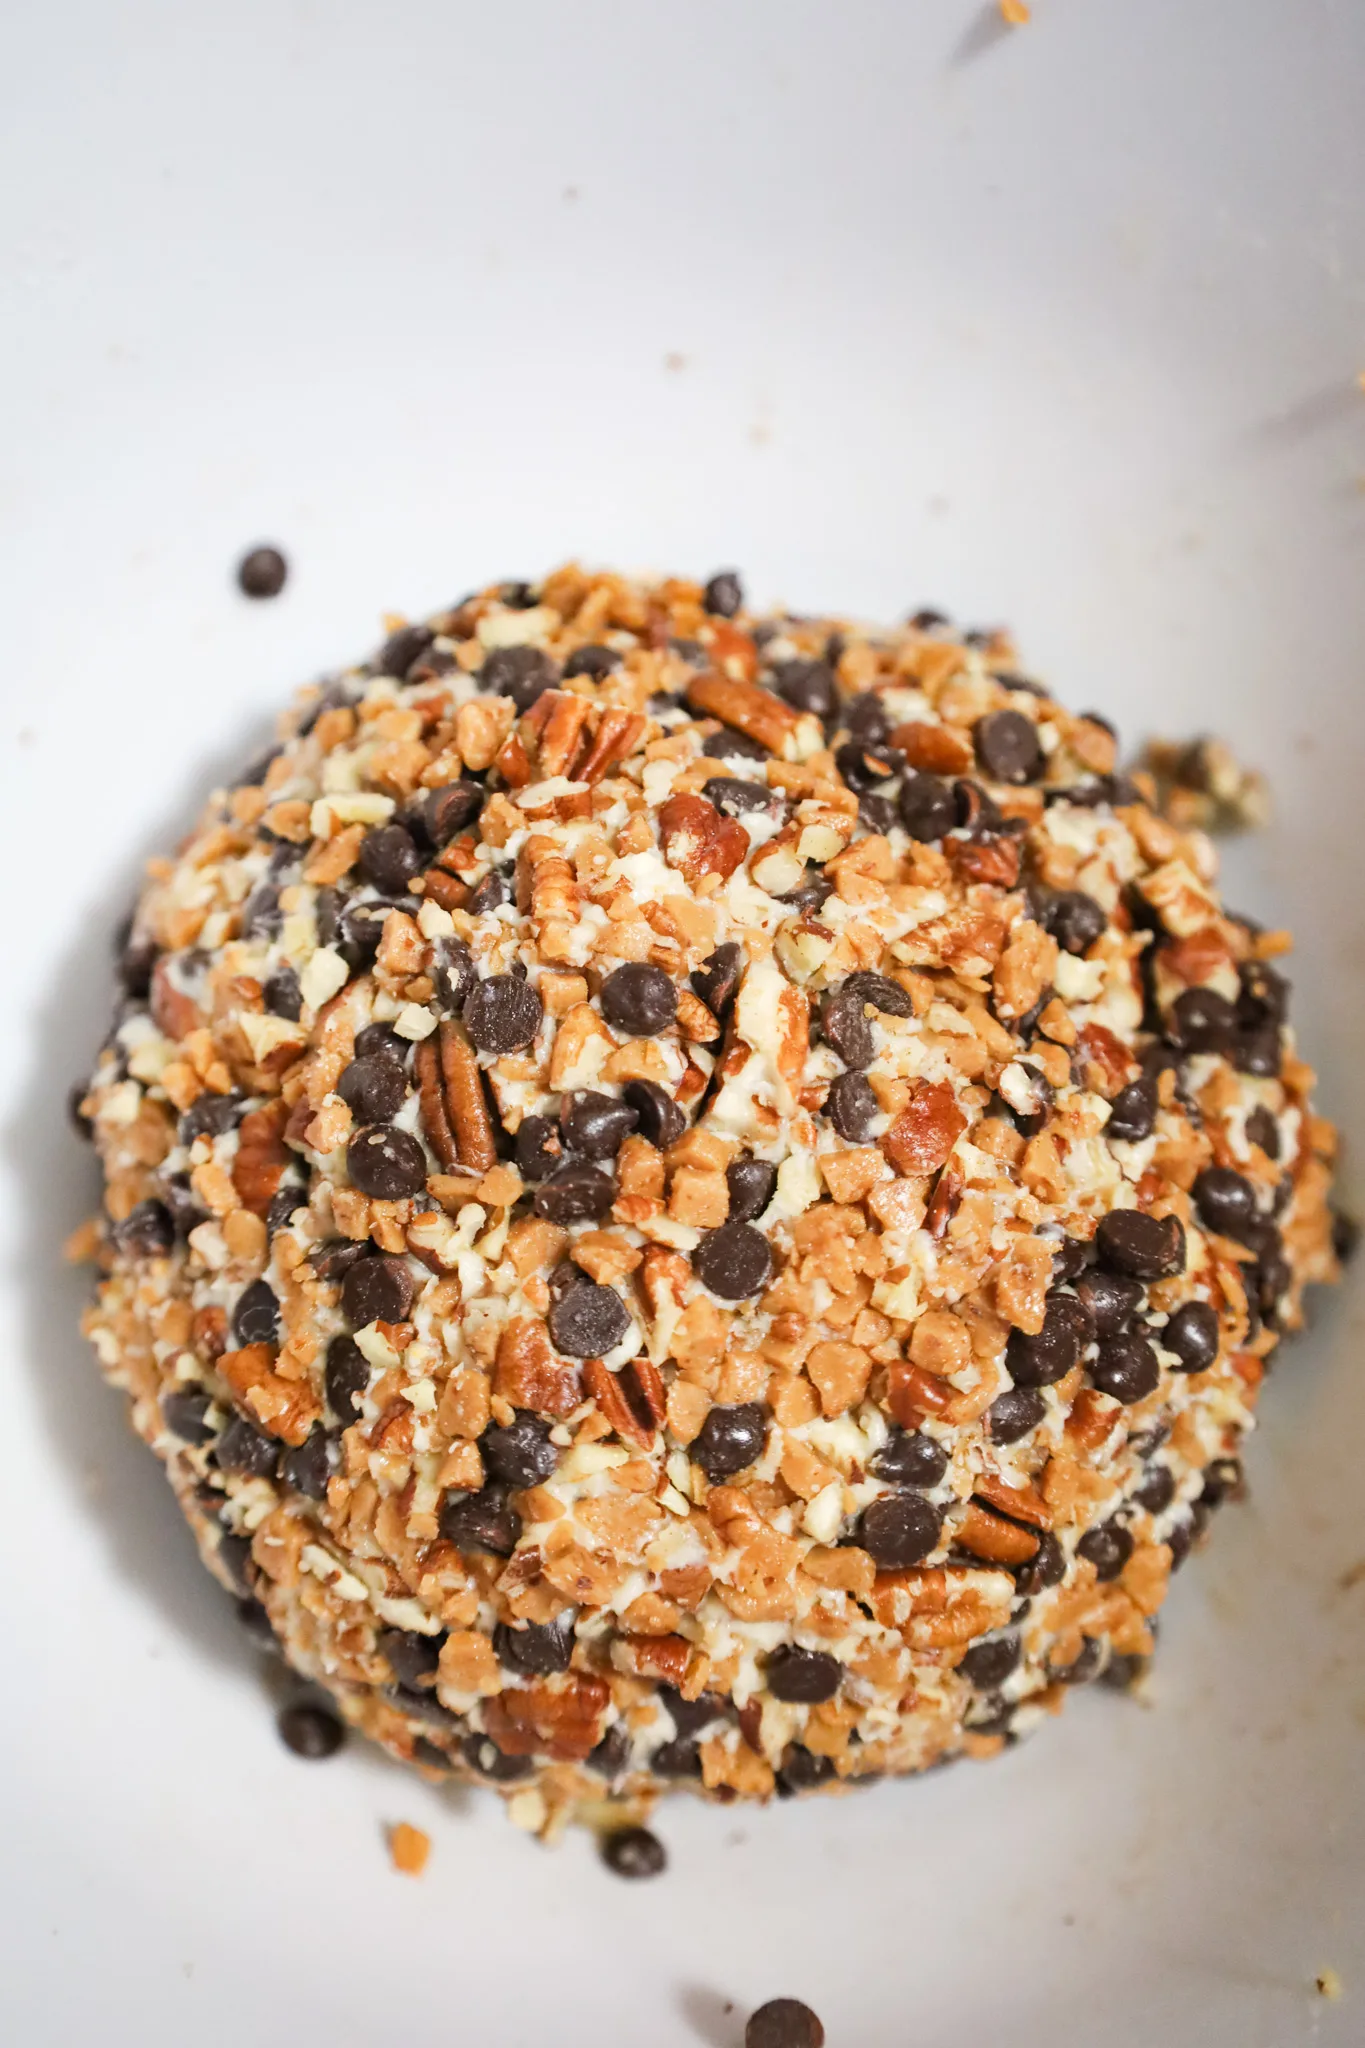 cream cheese ball coated in toffee bits, chocolate chips and chopped pecans